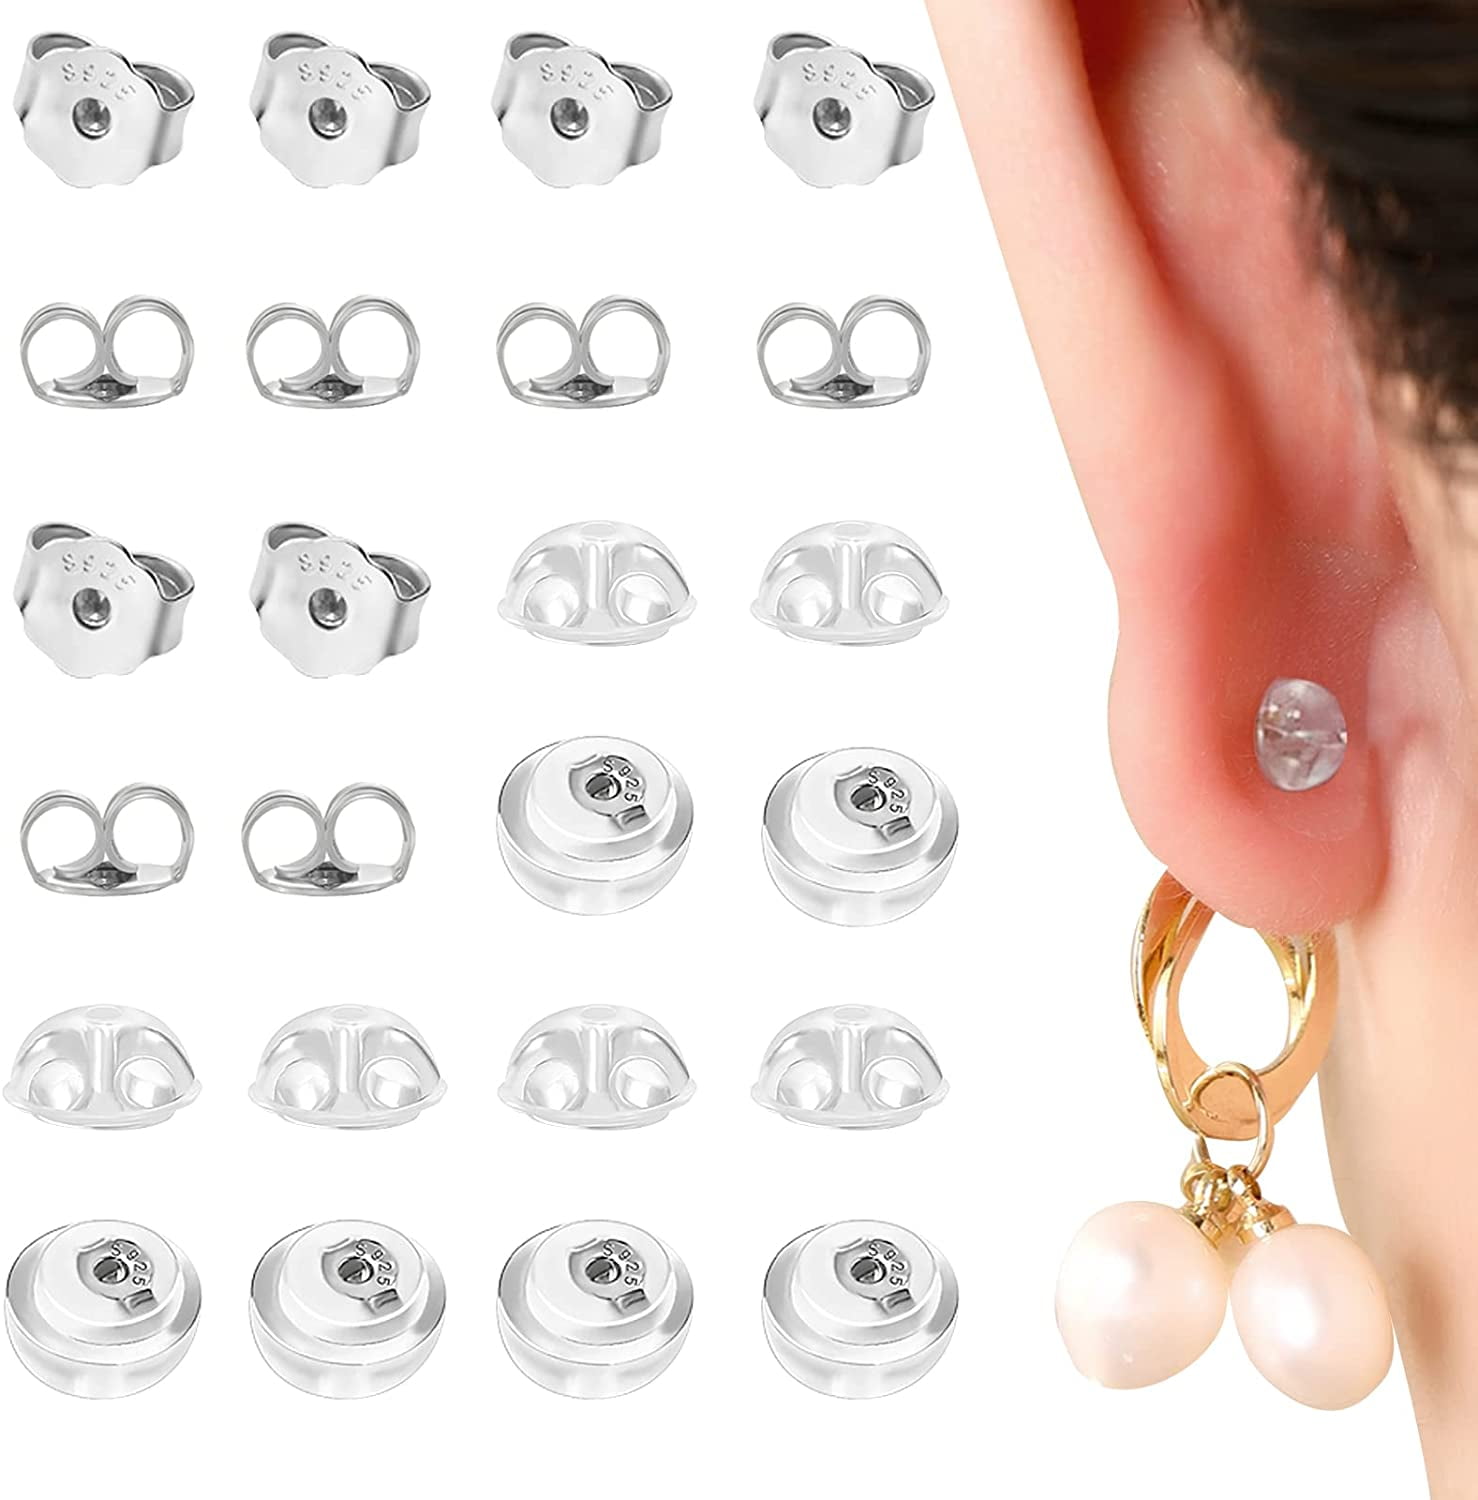  12PCS Real 925 Silver Earring Backs Replacements, 18K White  Gold Plated Hypoallergenic , Secure Ear Locking for Stud Nut for Posts, 6mm  : Arts, Crafts & Sewing